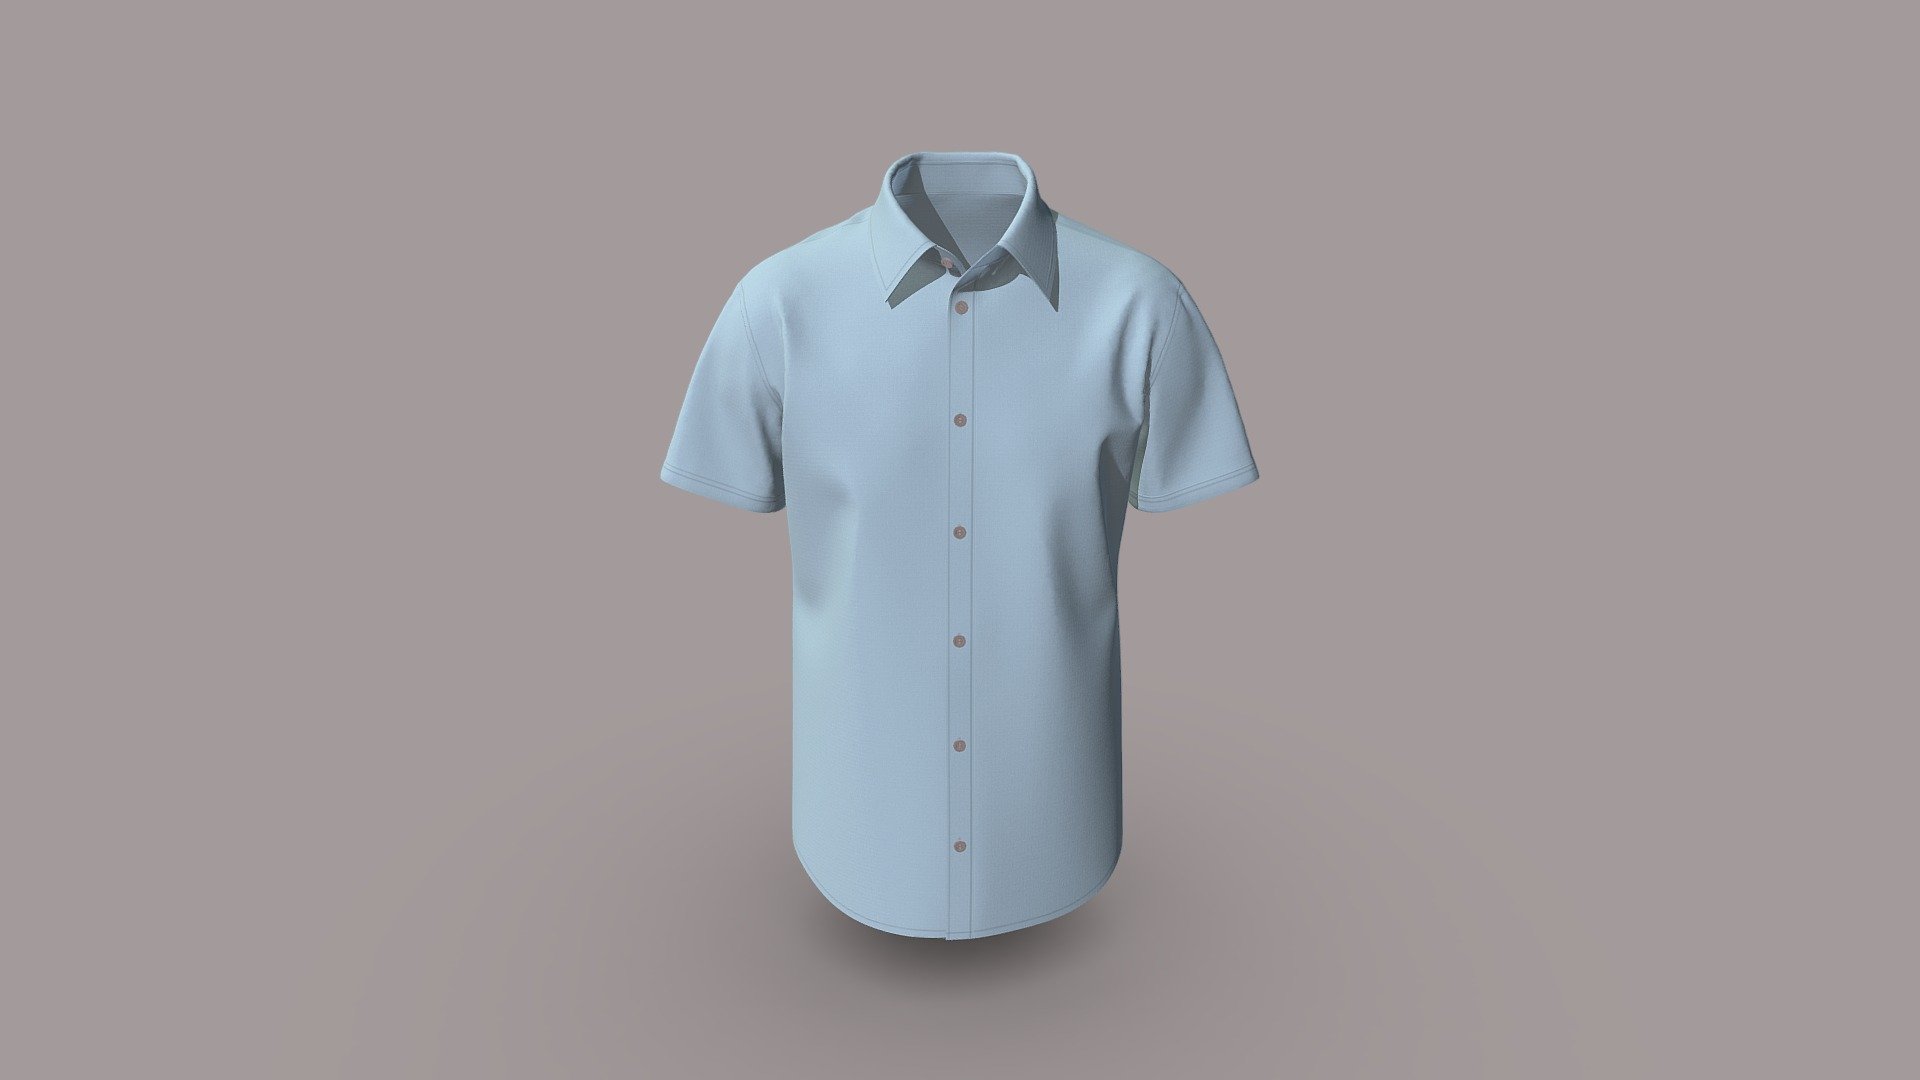 Cloth Title = Short Sleeve Shirt Design 

SKU = DG100073 

Category = Men 

Product Type = Shirt 

Cloth Length = Regular 

Body Fit = Slim Fit 

Occasion = Casual  

Sleeve Style = Short Sleeve


Our Services:

3D Apparel Design.

OBJ,FBX,GLTF Making with High/Low Poly.

Fabric Digitalization.

Mockup making.

3D Teck Pack.

Pattern Making.

2D Illustration.

Cloth Animation and 360 Spin Video.


Contact us:- 

Email: info@digitalfashionwear.com 

Website: https://digitalfashionwear.com 

WhatsApp No: +8801759350445 


We designed all the types of cloth specially focused on product visualization, e-commerce, fitting, and production. 

We will design: 

T-shirts 

Polo shirts 

Hoodies 

Sweatshirt 

Jackets 

Shirts 

TankTops 

Trousers 

Bras 

Underwear 

Blazer 

Aprons 

Leggings 

and All Fashion items. 





Our goal is to make sure what we provide you, meets your demand 3d model